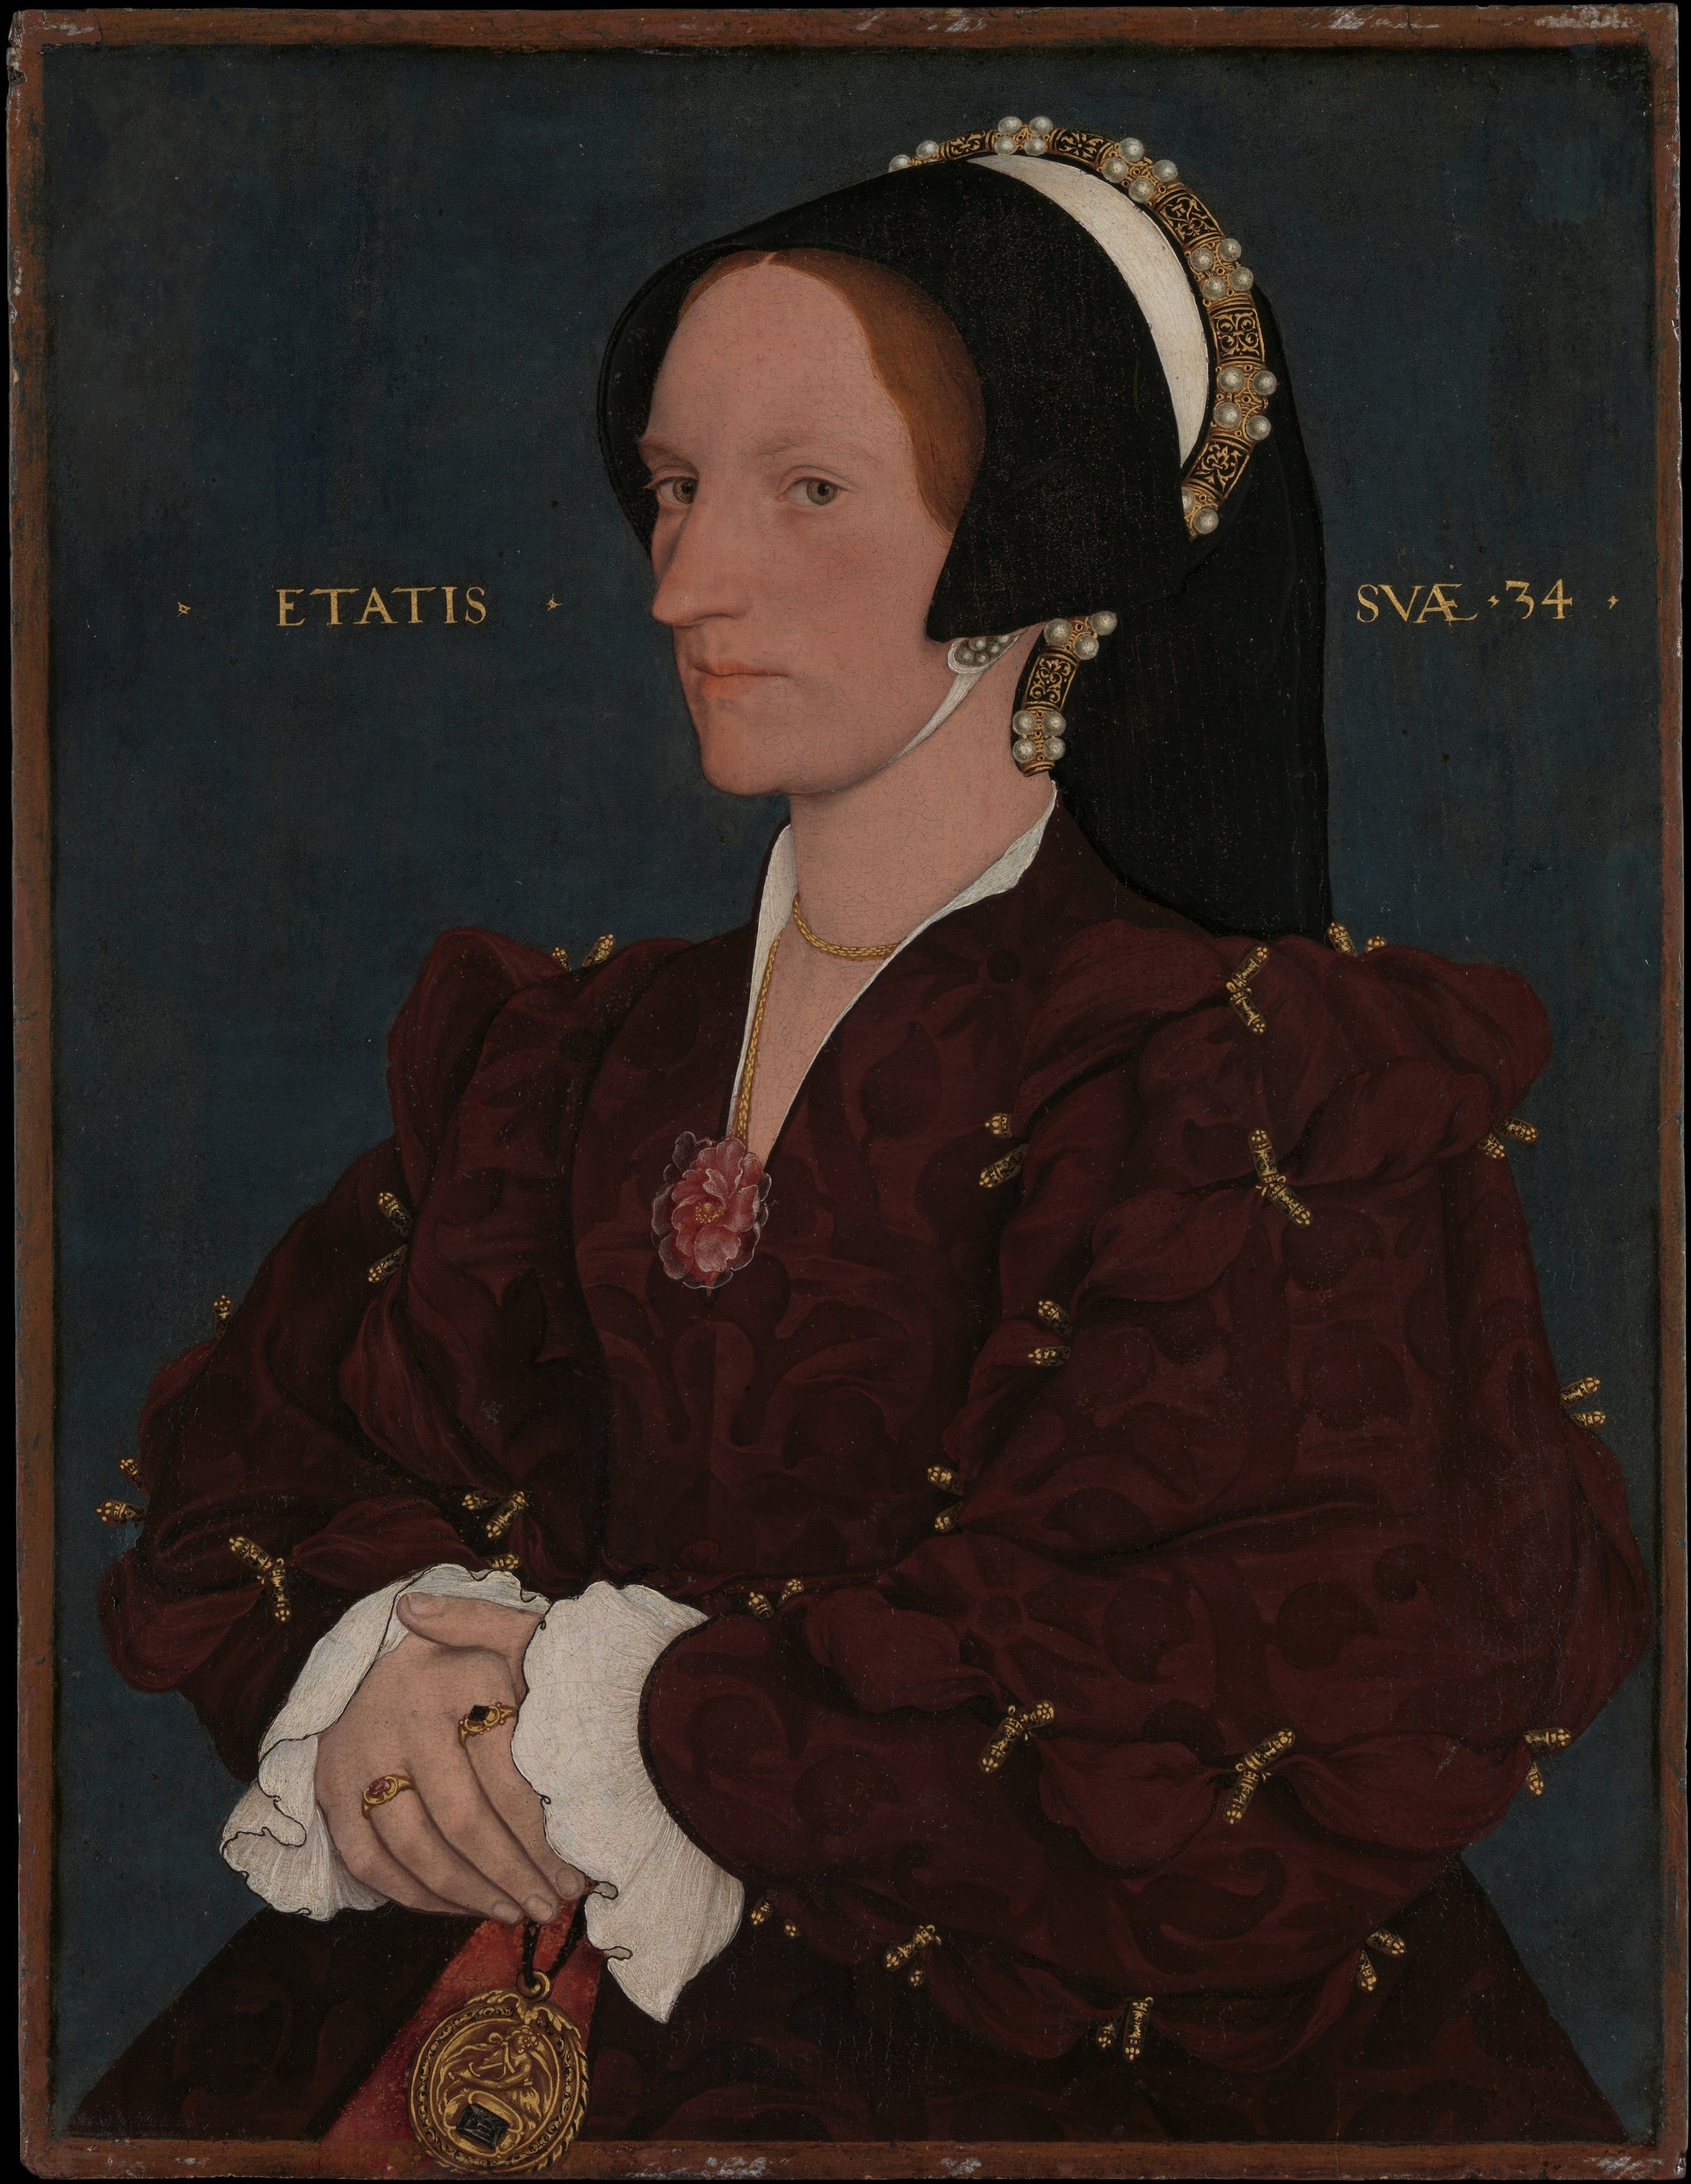 Margaret Wyatt, Lady Lee by Hans Holbein the Younger - 1540 - 42.5 x 32.7 cm 